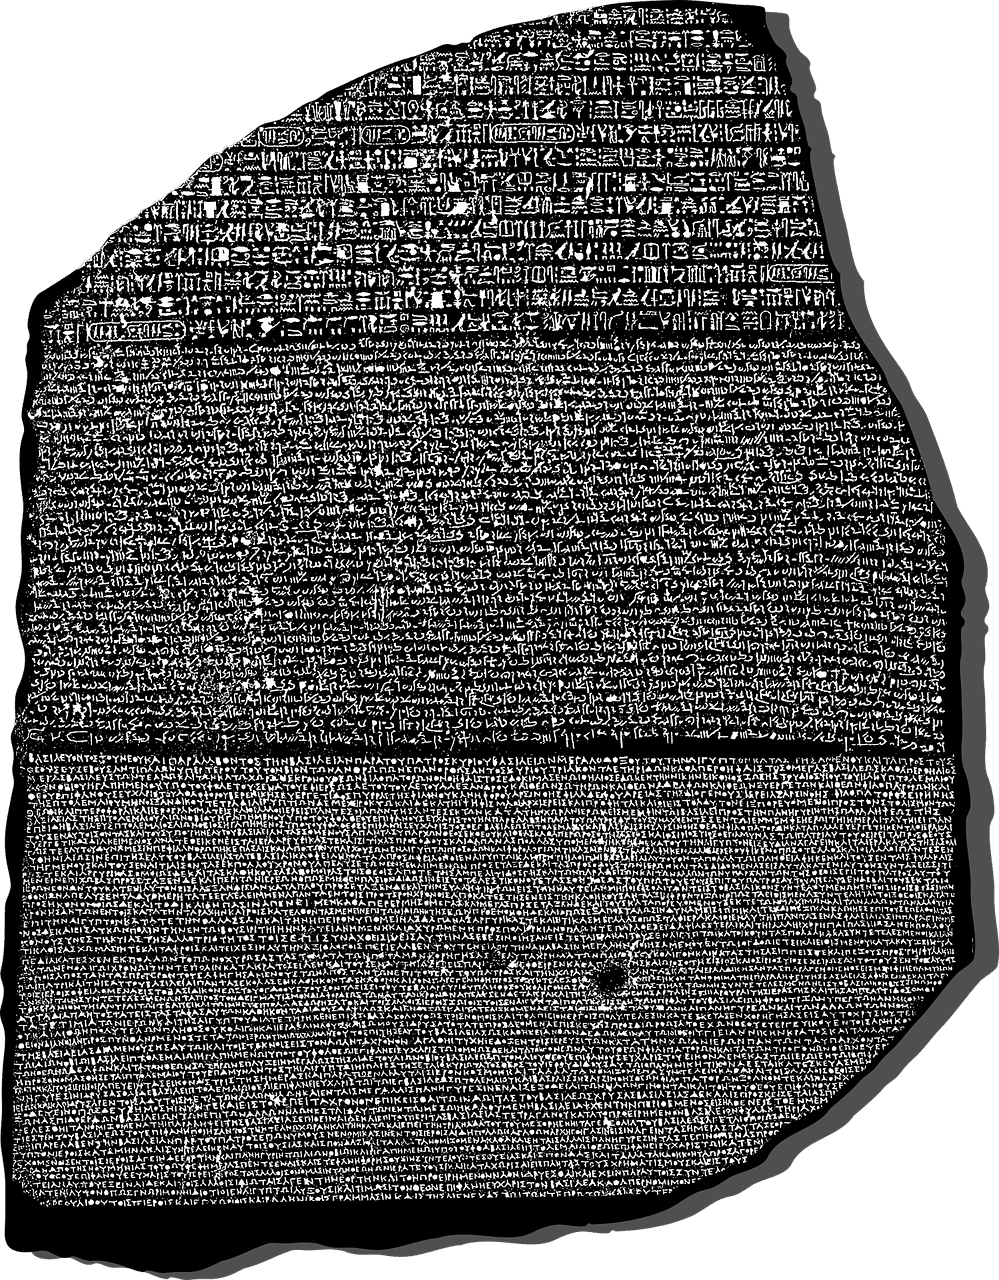 Facts about the Rosetta Stone